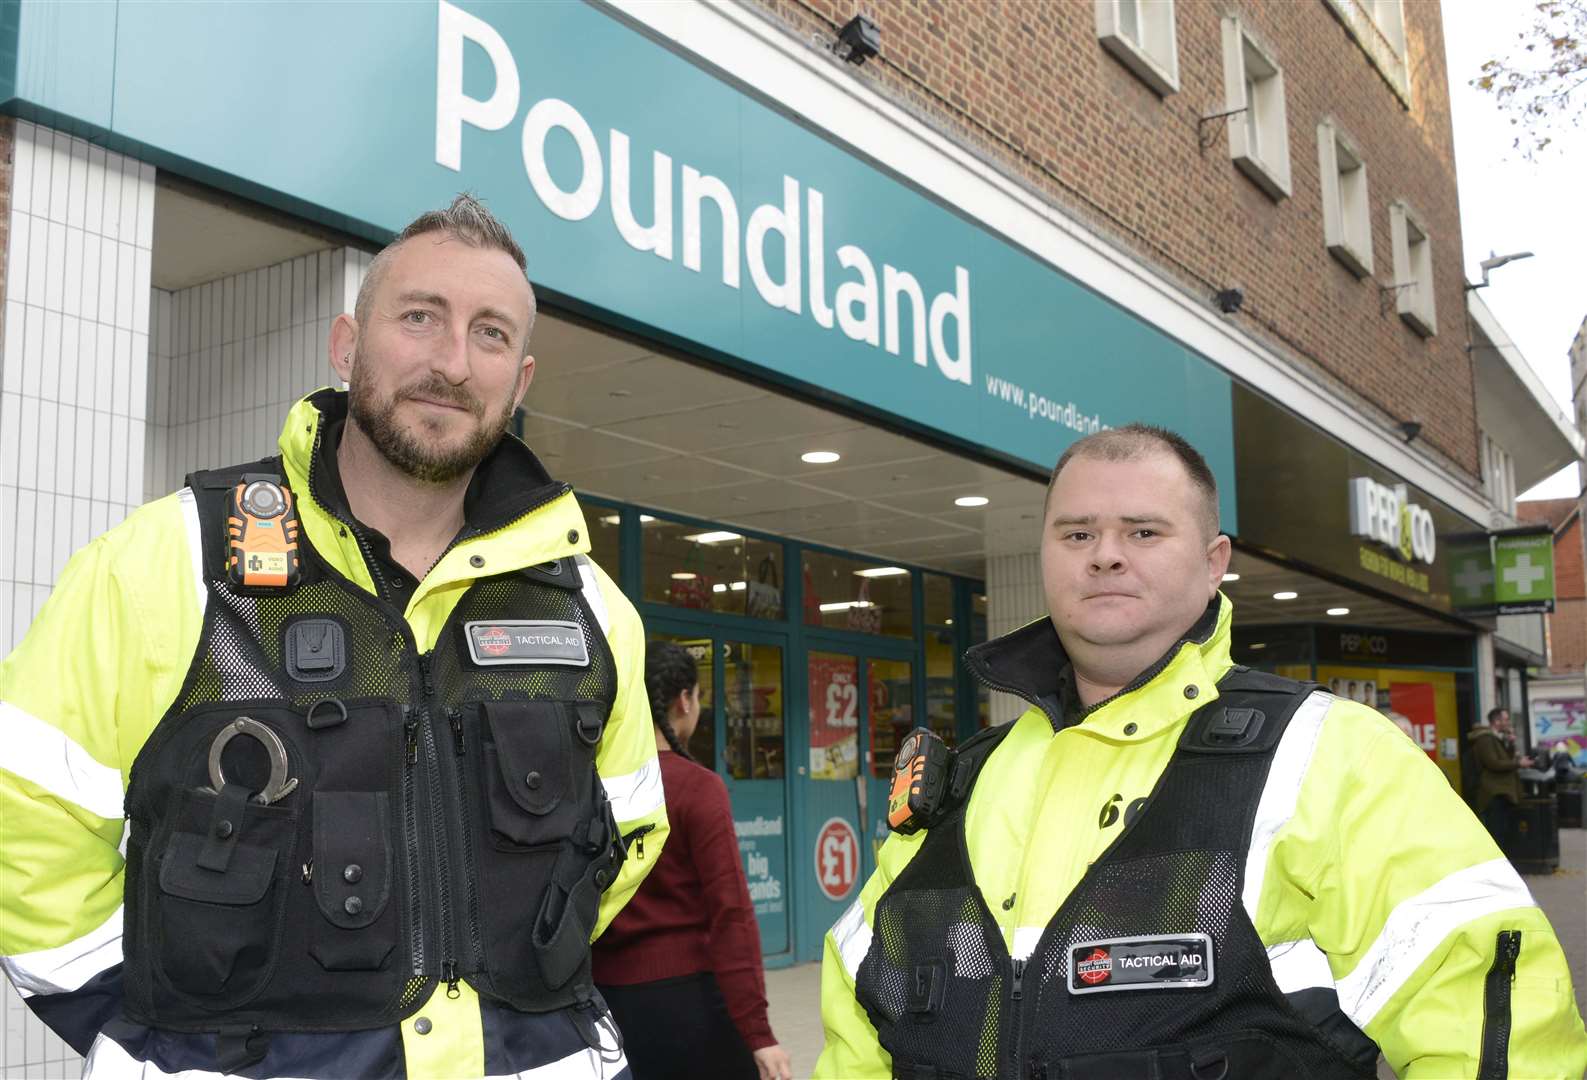 Security guards Peter Hunt and Dan Stannard came to the aid of Poundland staff. Picture: Paul Amos